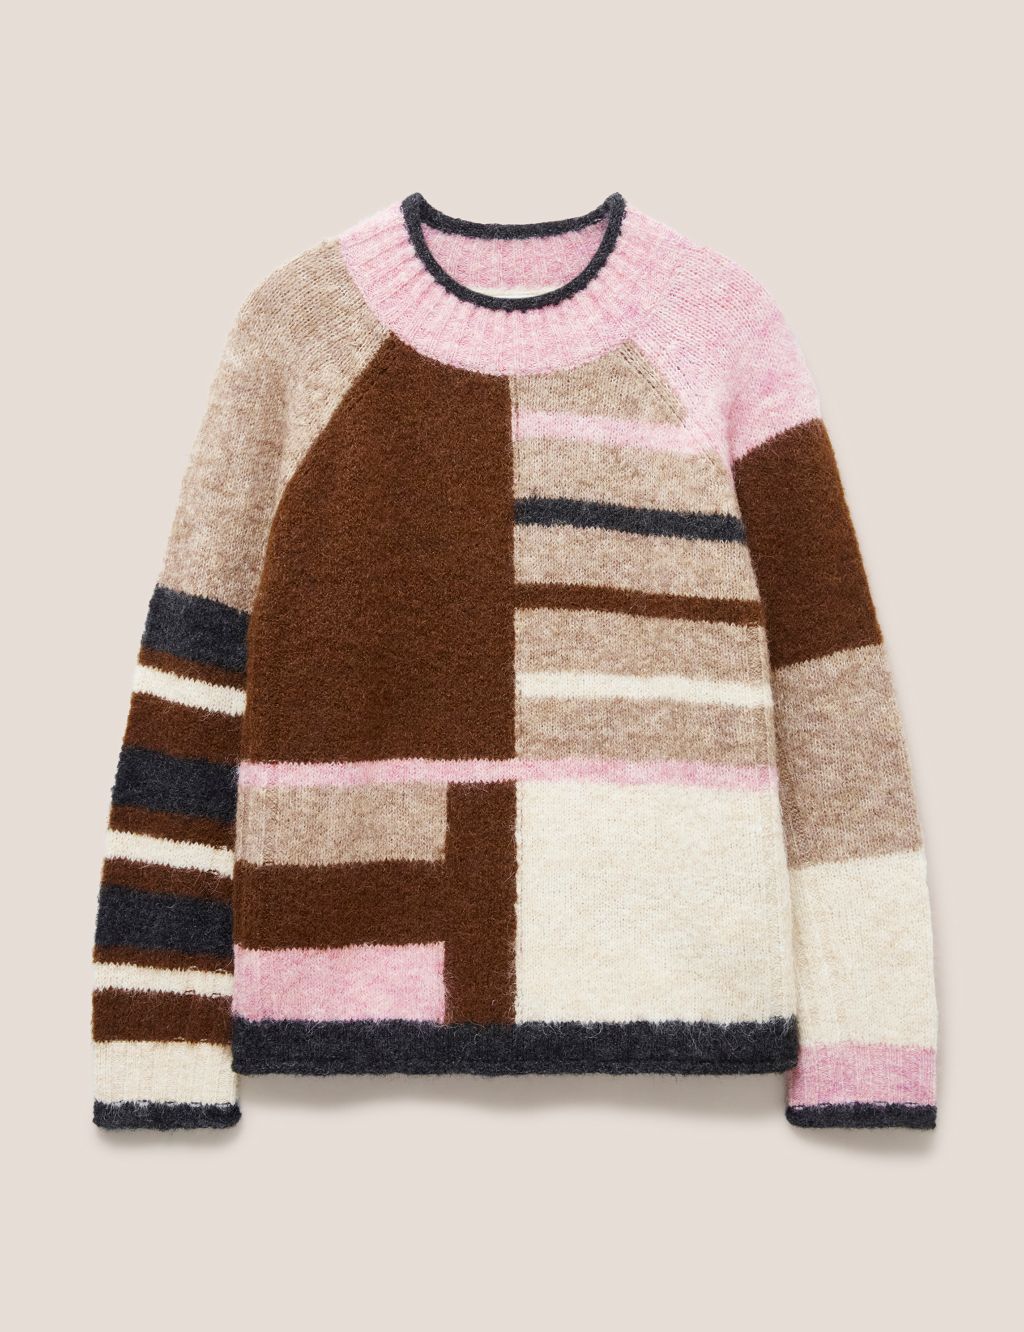 Colour Block Crew Neck Jumper with Wool image 2